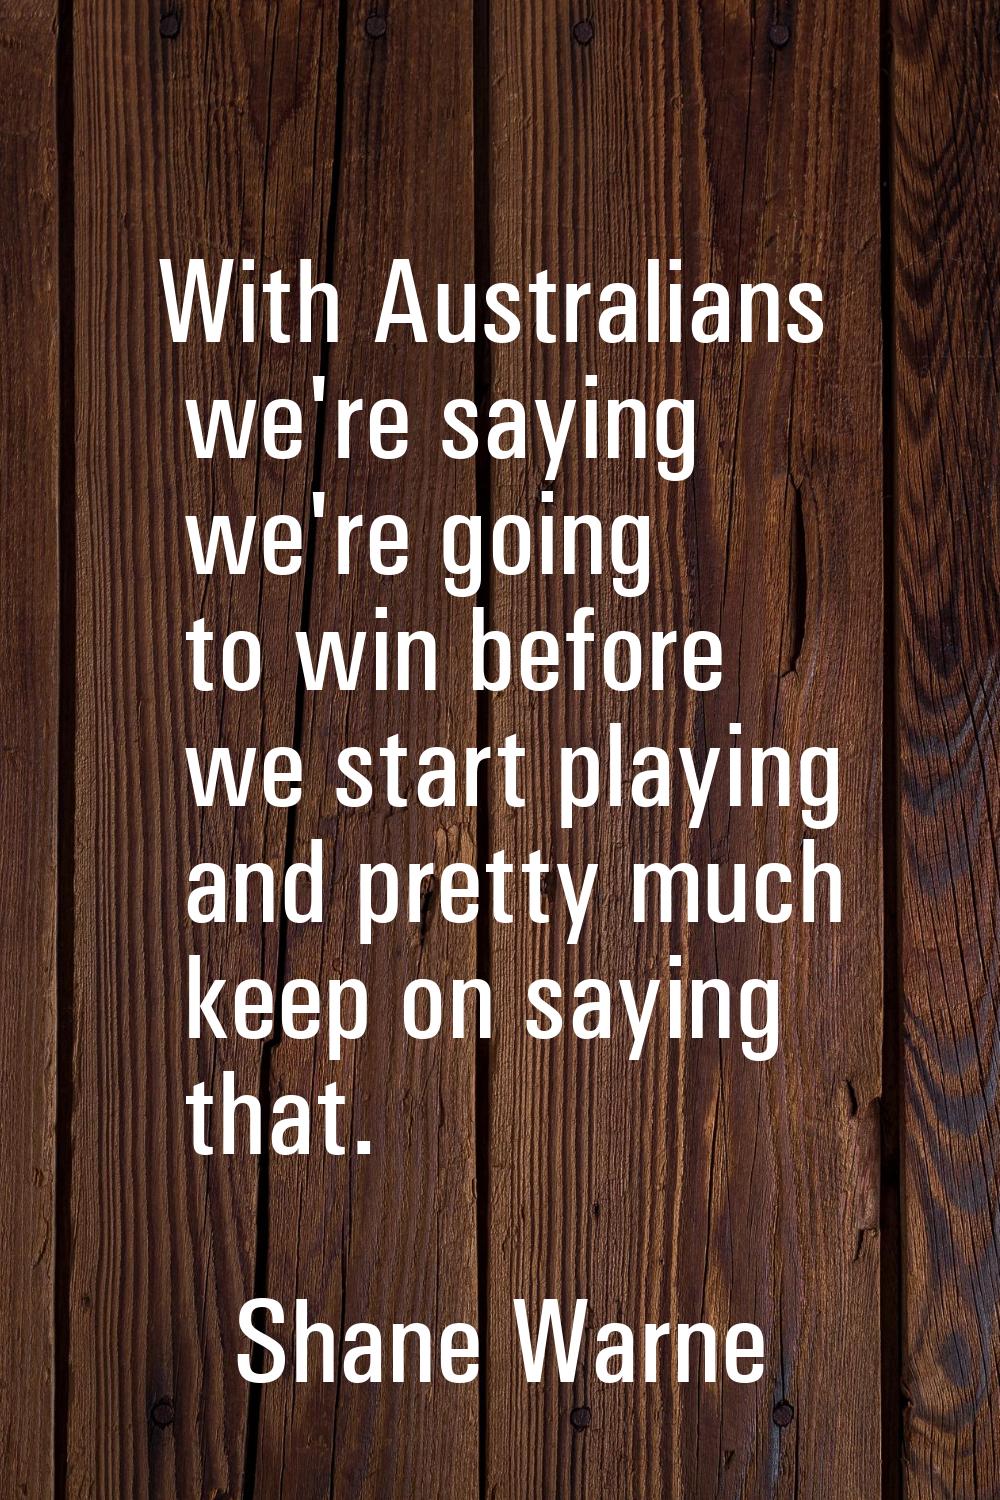 With Australians we're saying we're going to win before we start playing and pretty much keep on sa